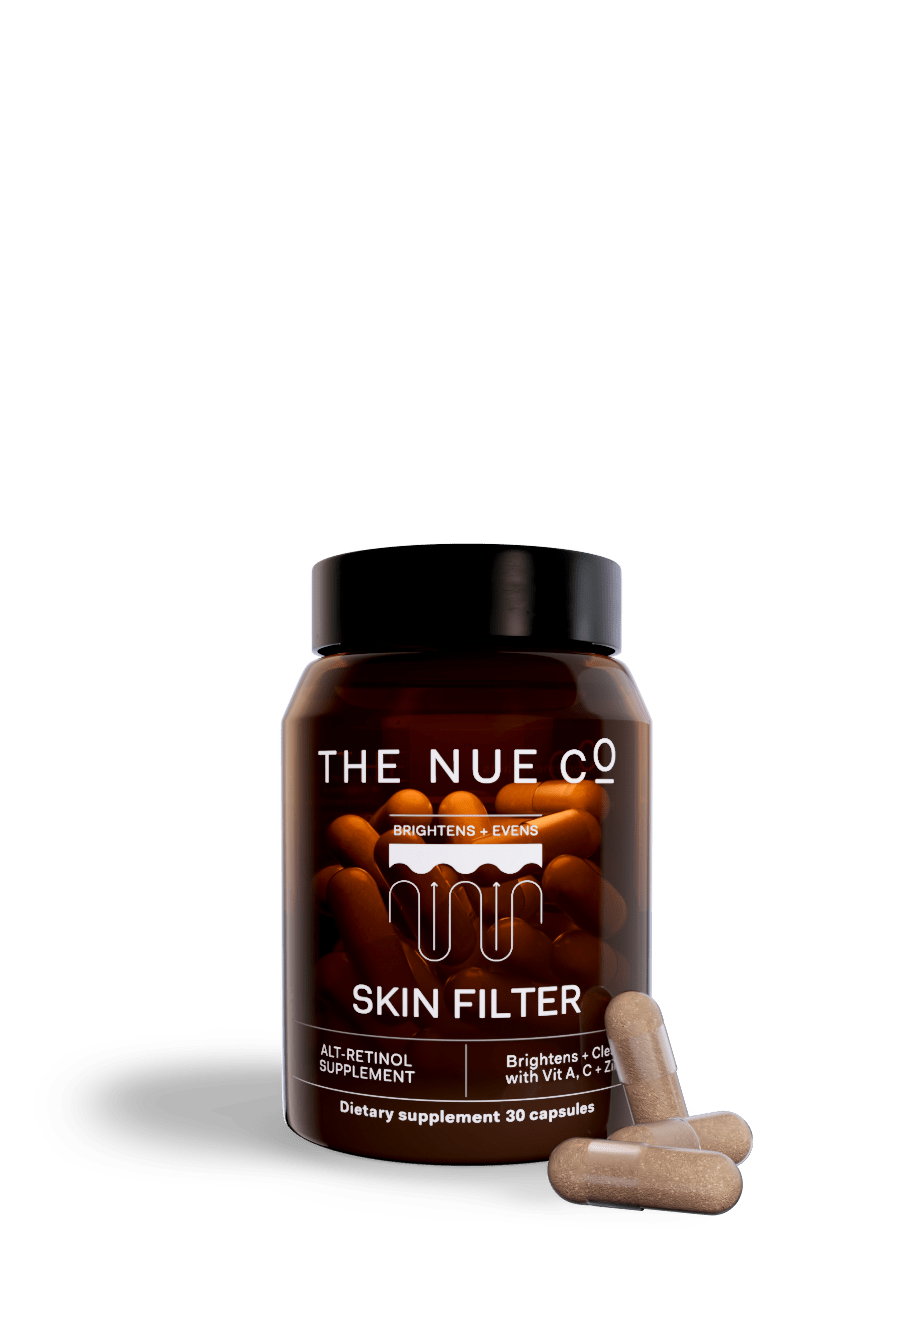 SKIN FILTER single The Nue Co. 